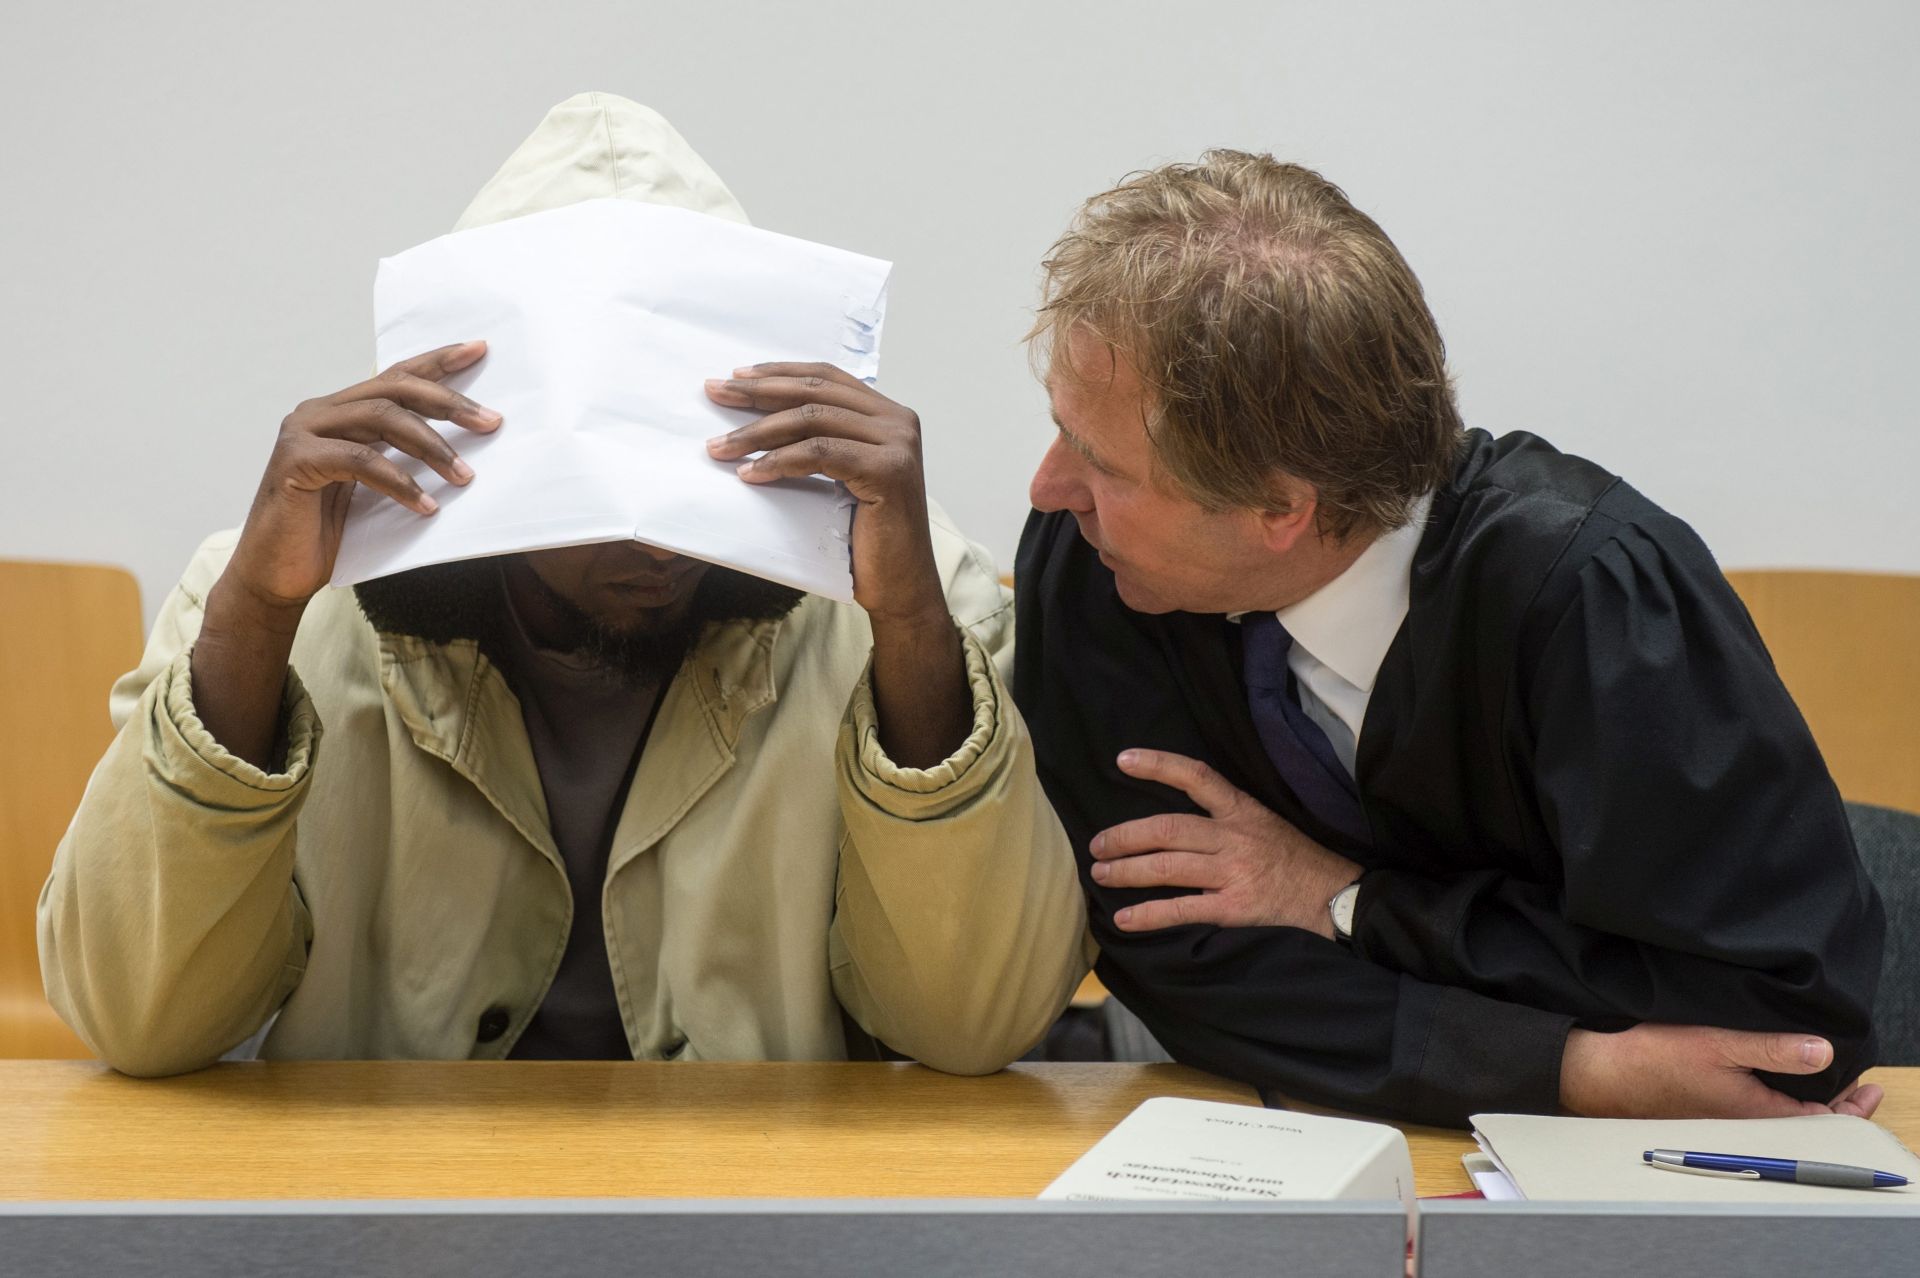 epa05467033 Defendant Mohammed S. (L) tries to cover his face as he speaks with his defense lawyer Thomas Krimmel (R) in the courtroom of the district court in Landshut, Germany, 09 August 2016. The 38-year-old man is charged with stabbing to death a 20-year-old roommate following a fight in a refugee home in February 2016.  EPA/ARMIN WEIGEL  EPA/ARMIN WEIGEL